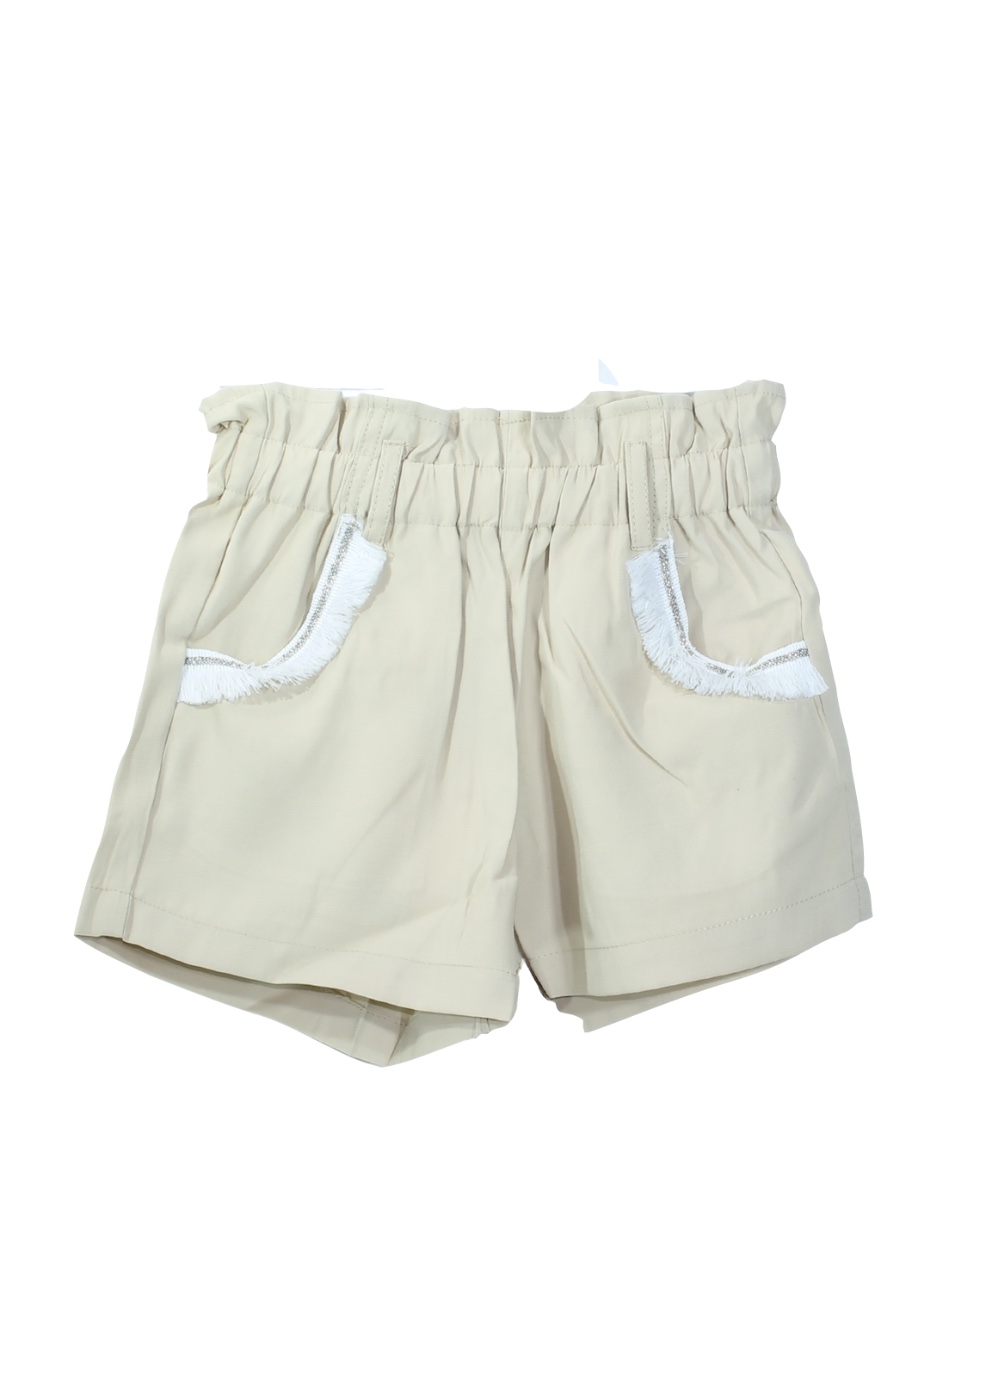 Featured image for “FUN&FUN SHORTS BEIGE”